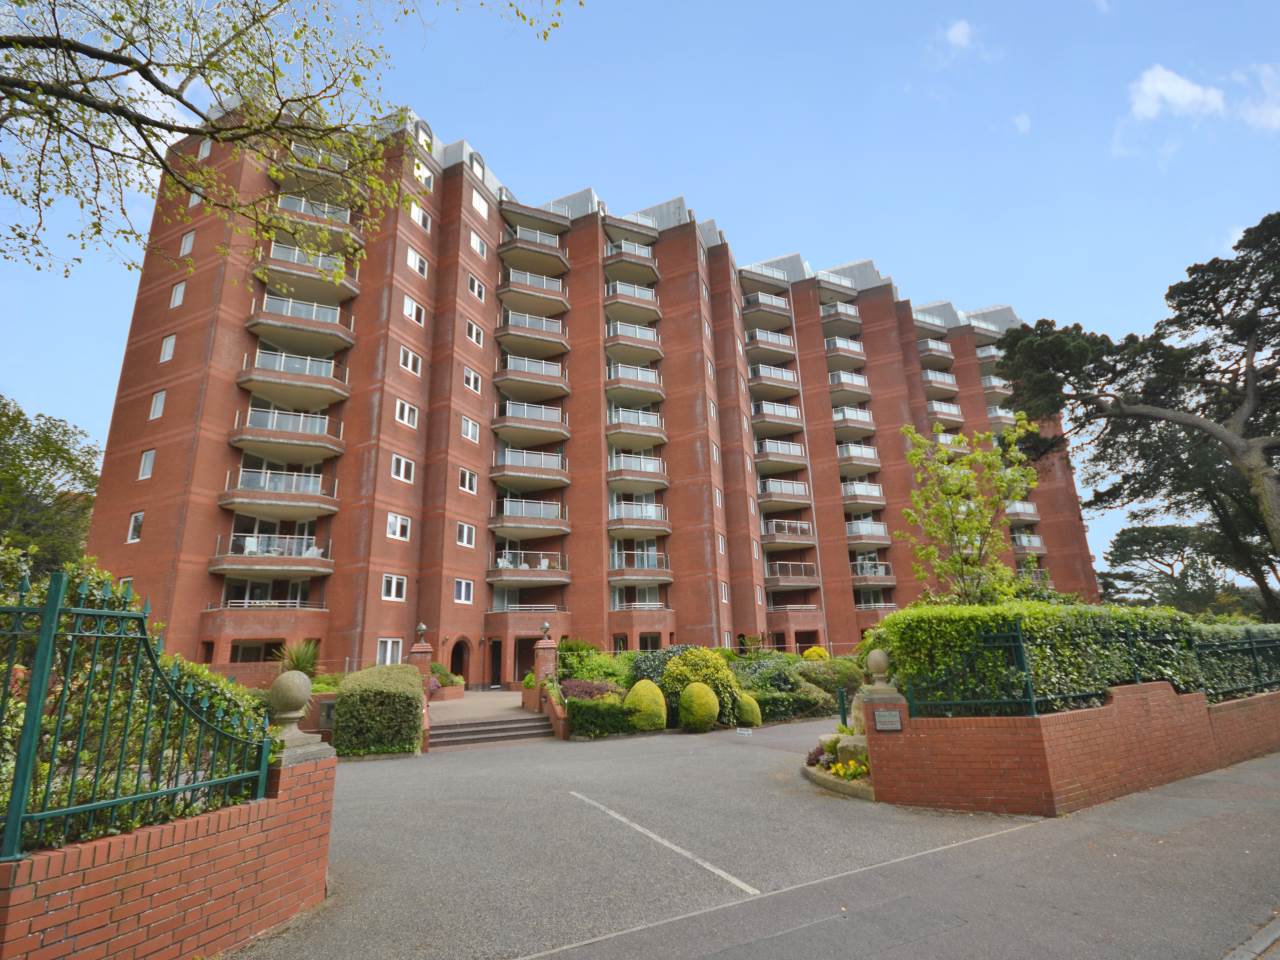 3 bed flat for sale in Green Park, 91 Manor Road - Property Image 1